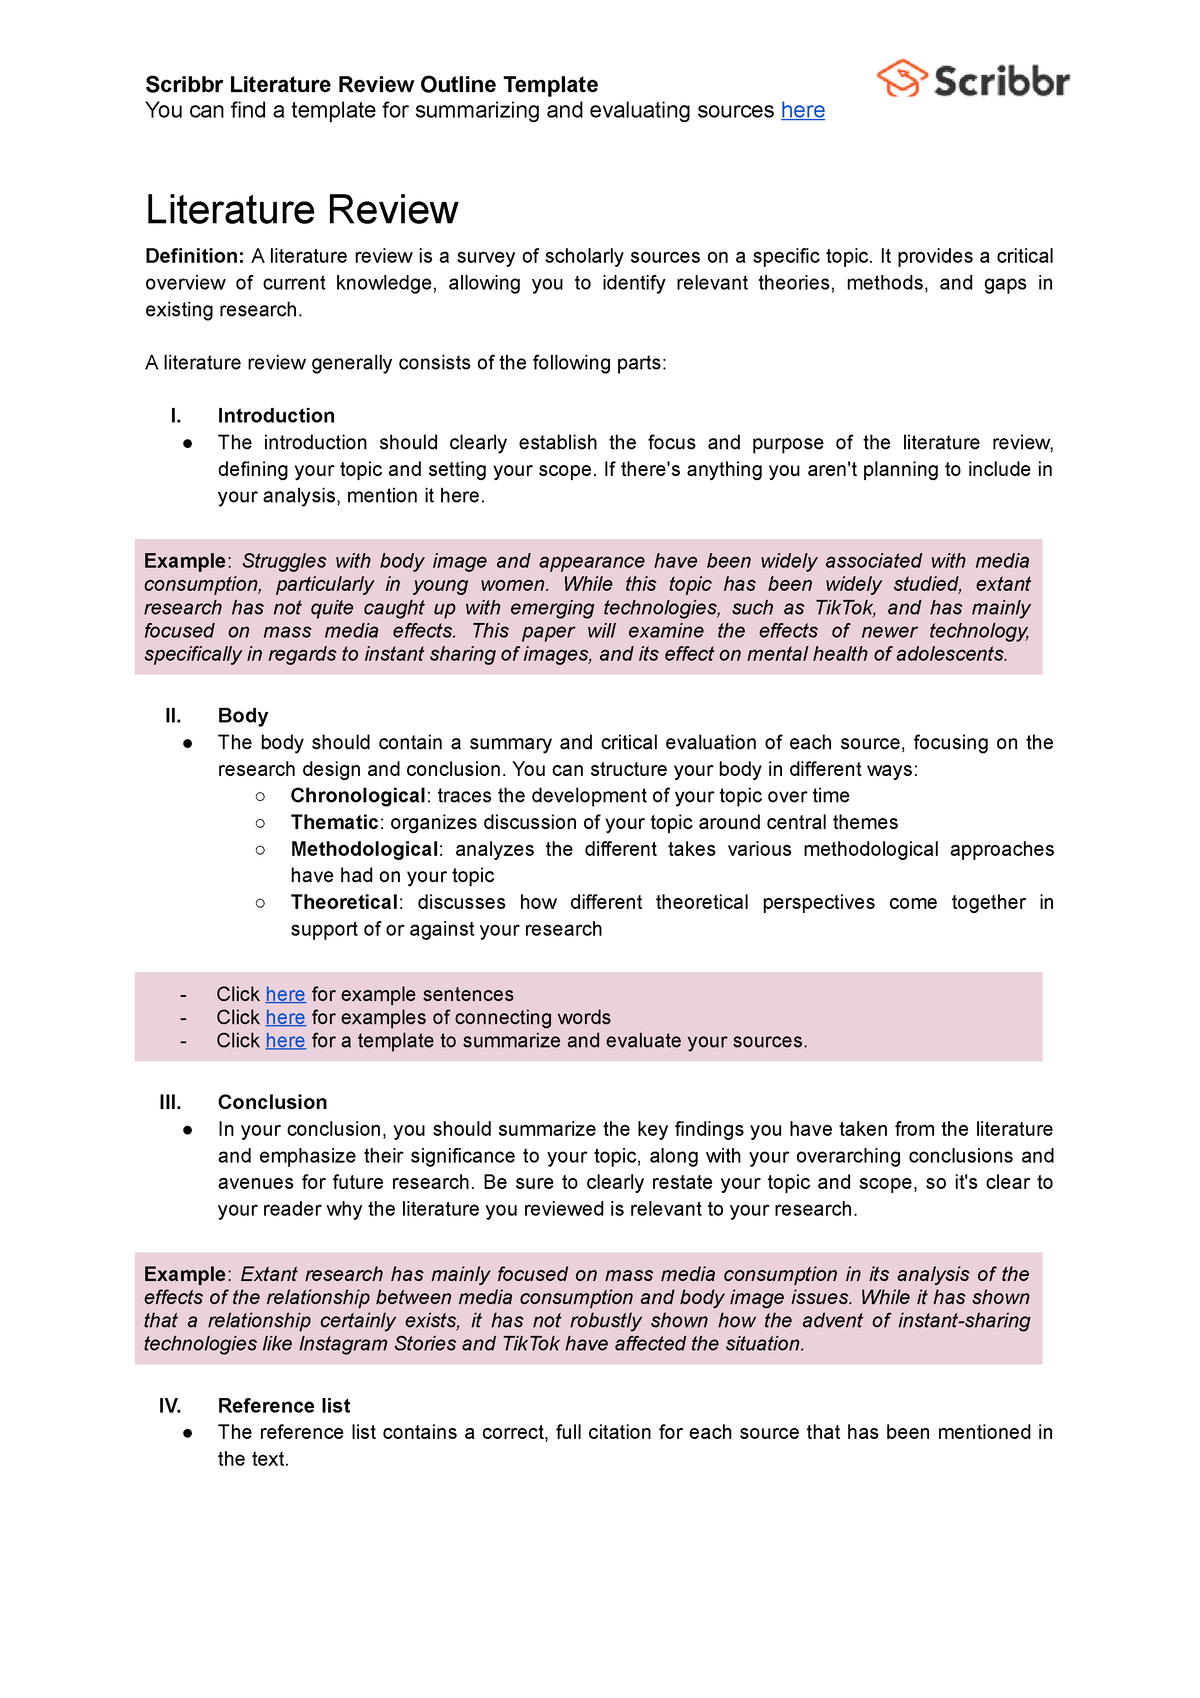 scribbr literature review template